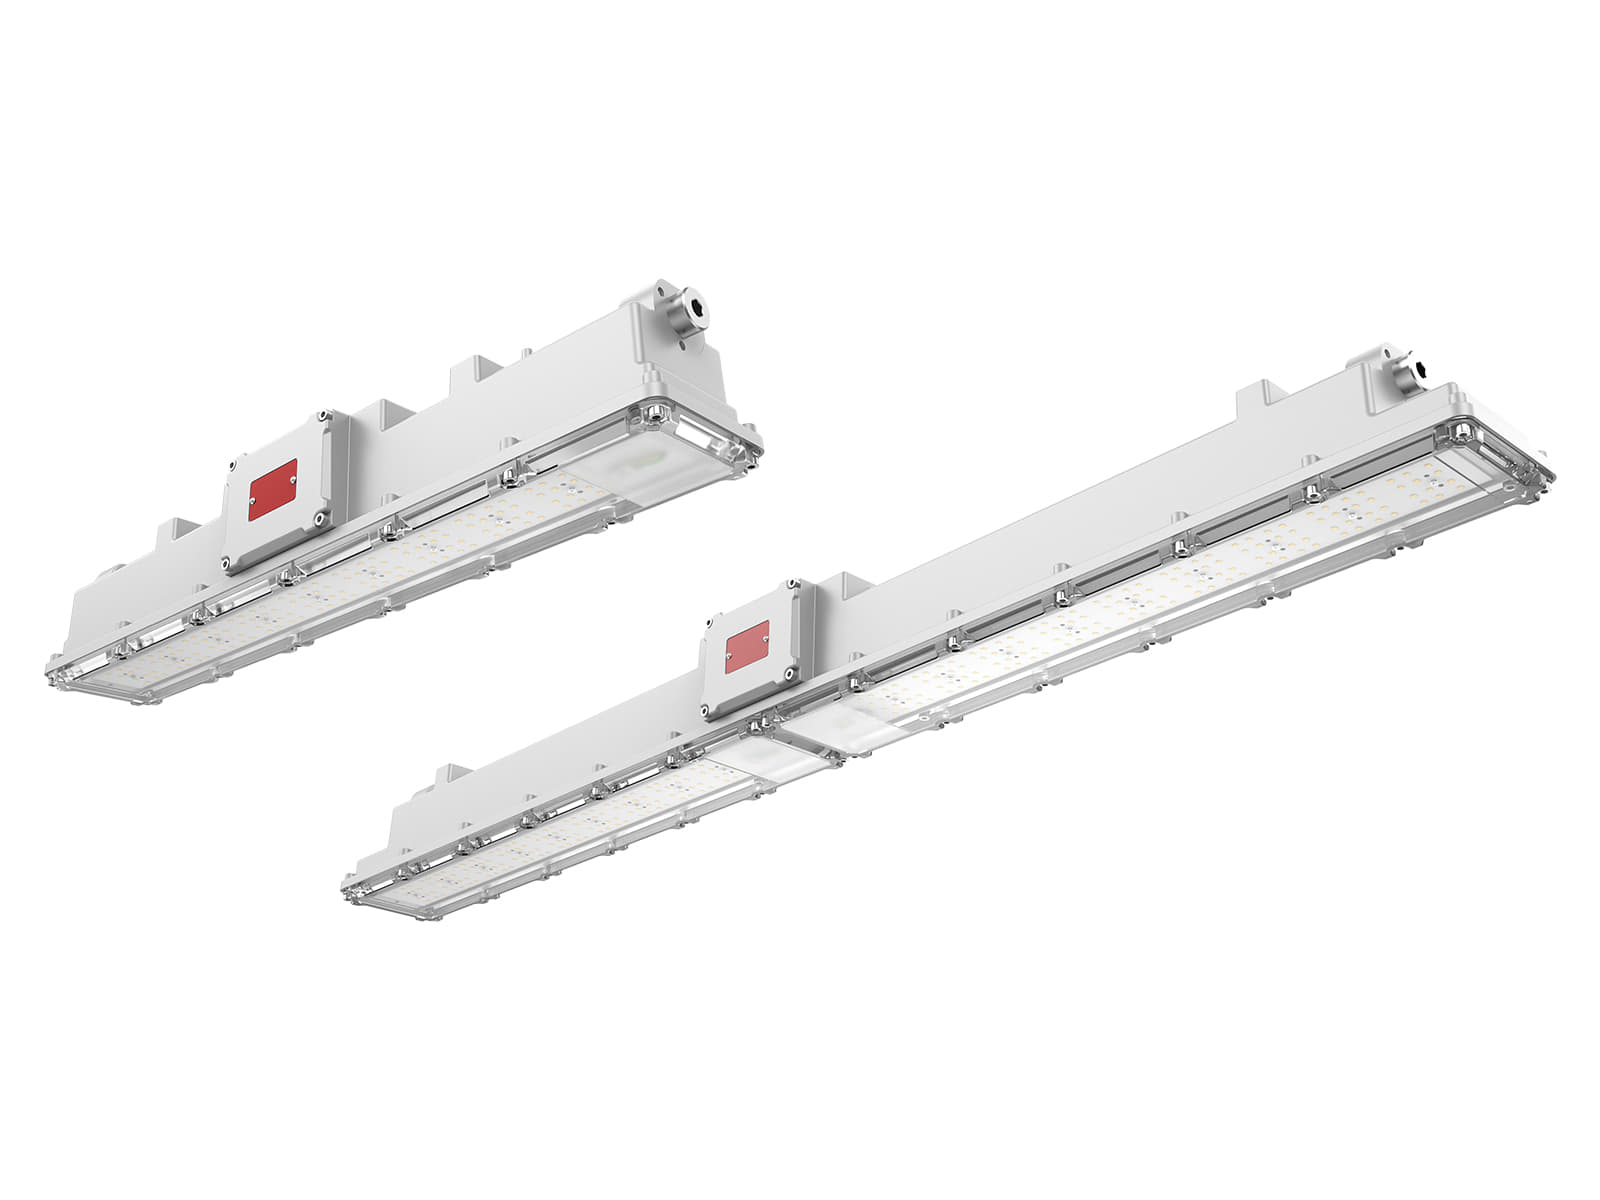 HA06 LED Luminaire use in gas zone 2, dust zone 21 and 22